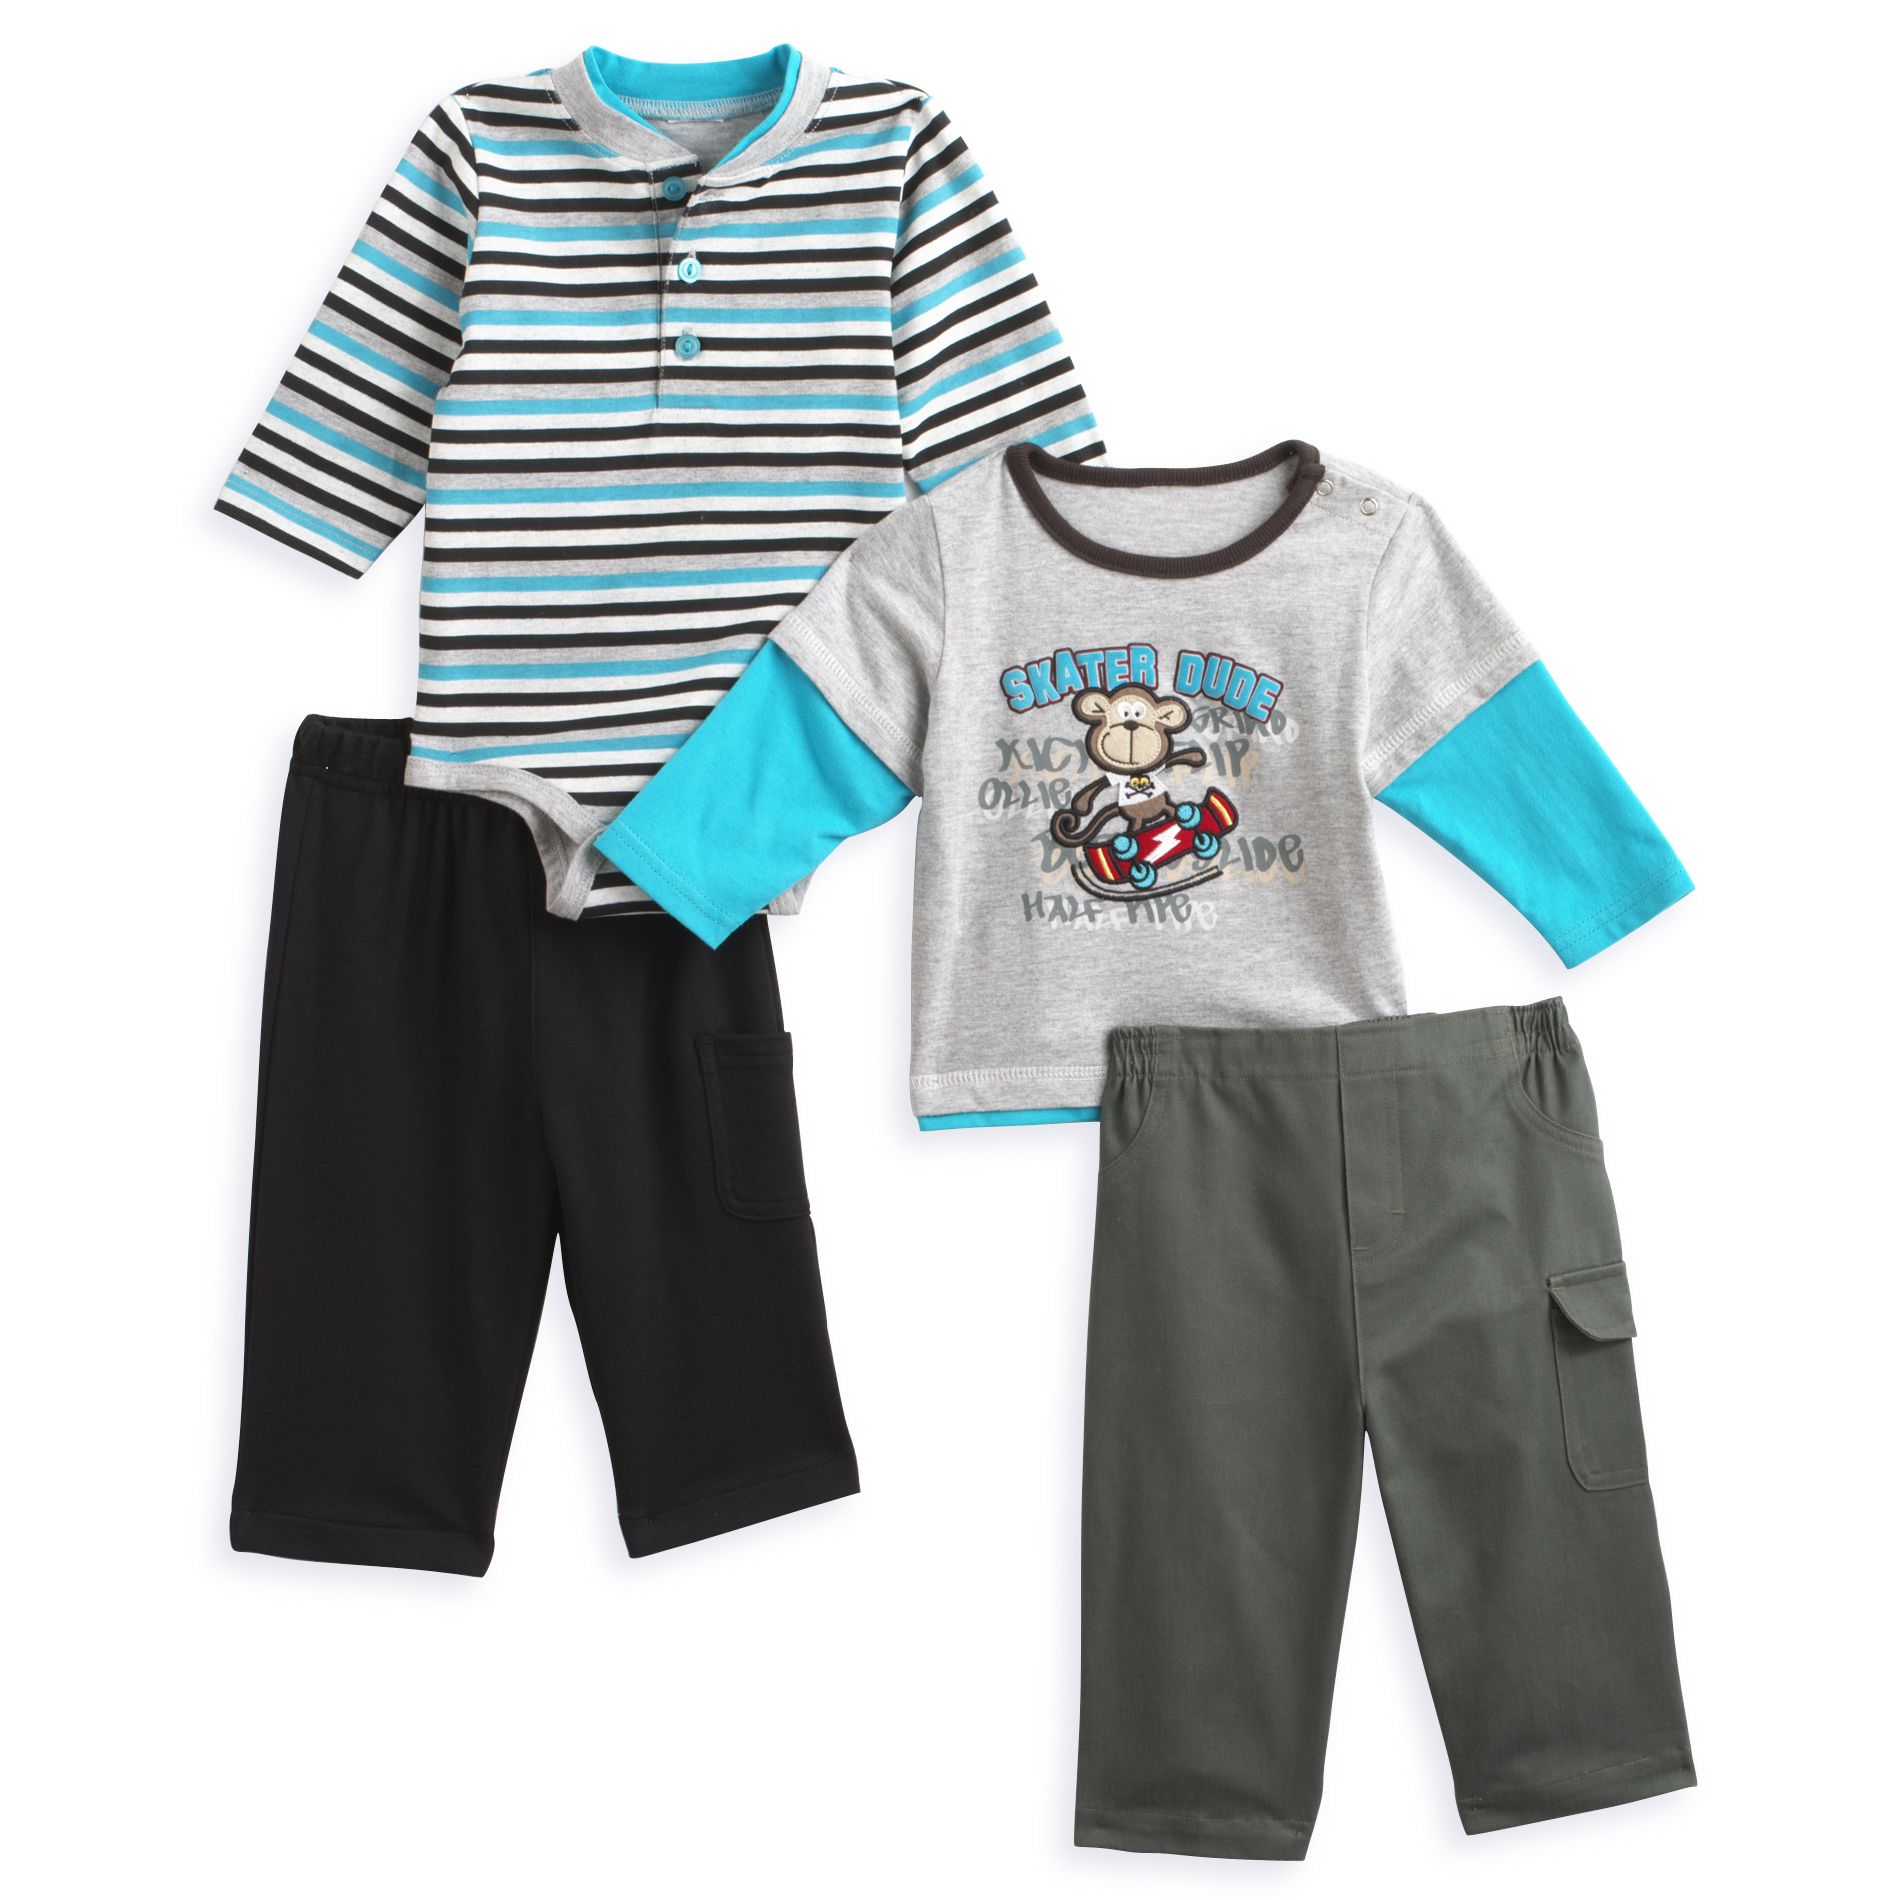 Kids Play Newborn Boy&#39;s Skater Dude Twill Pants Outfit